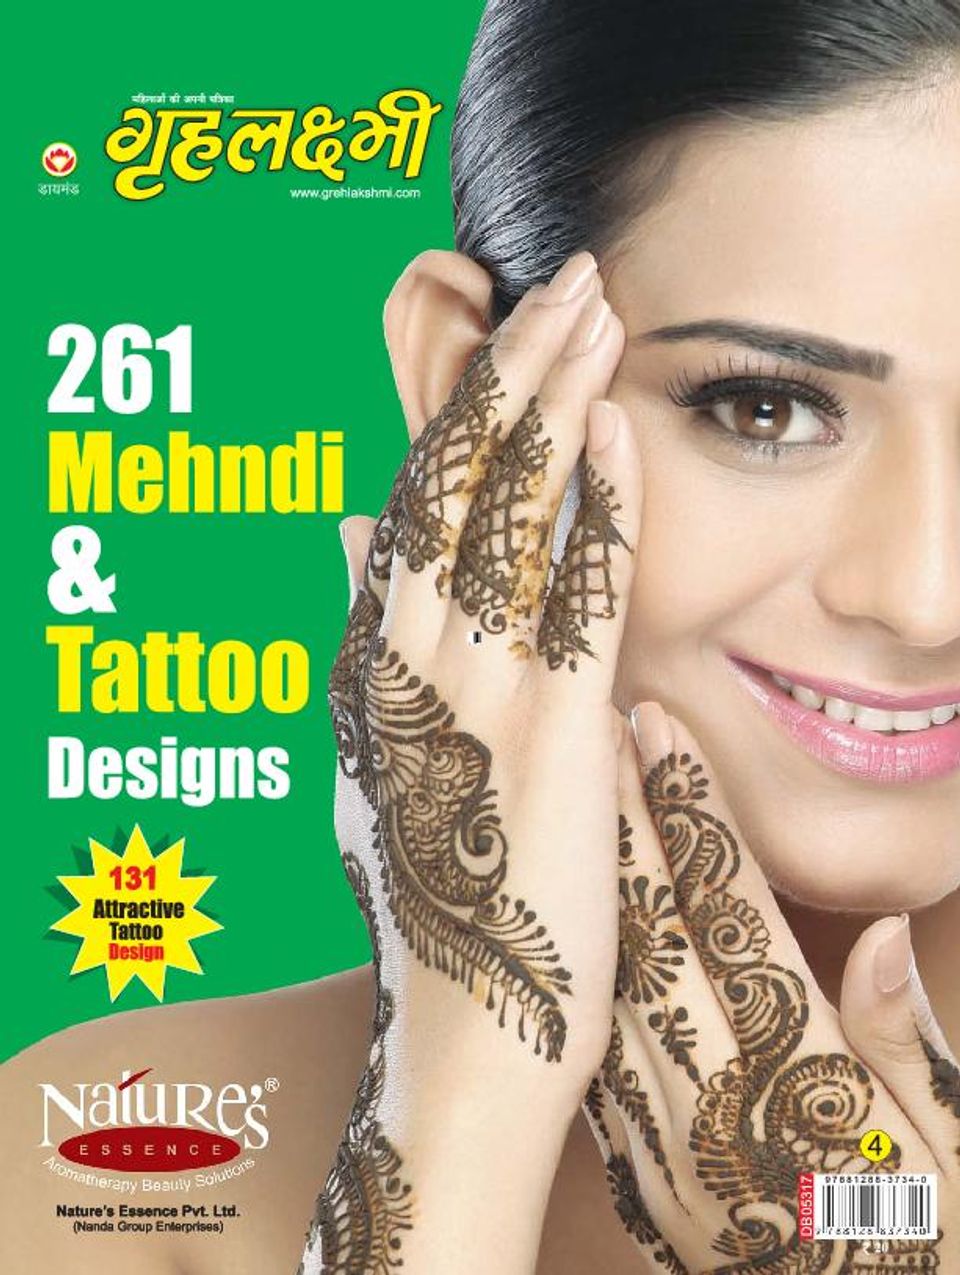 Mehandi Design and tattoo designs • ShareChat Photos and Videos